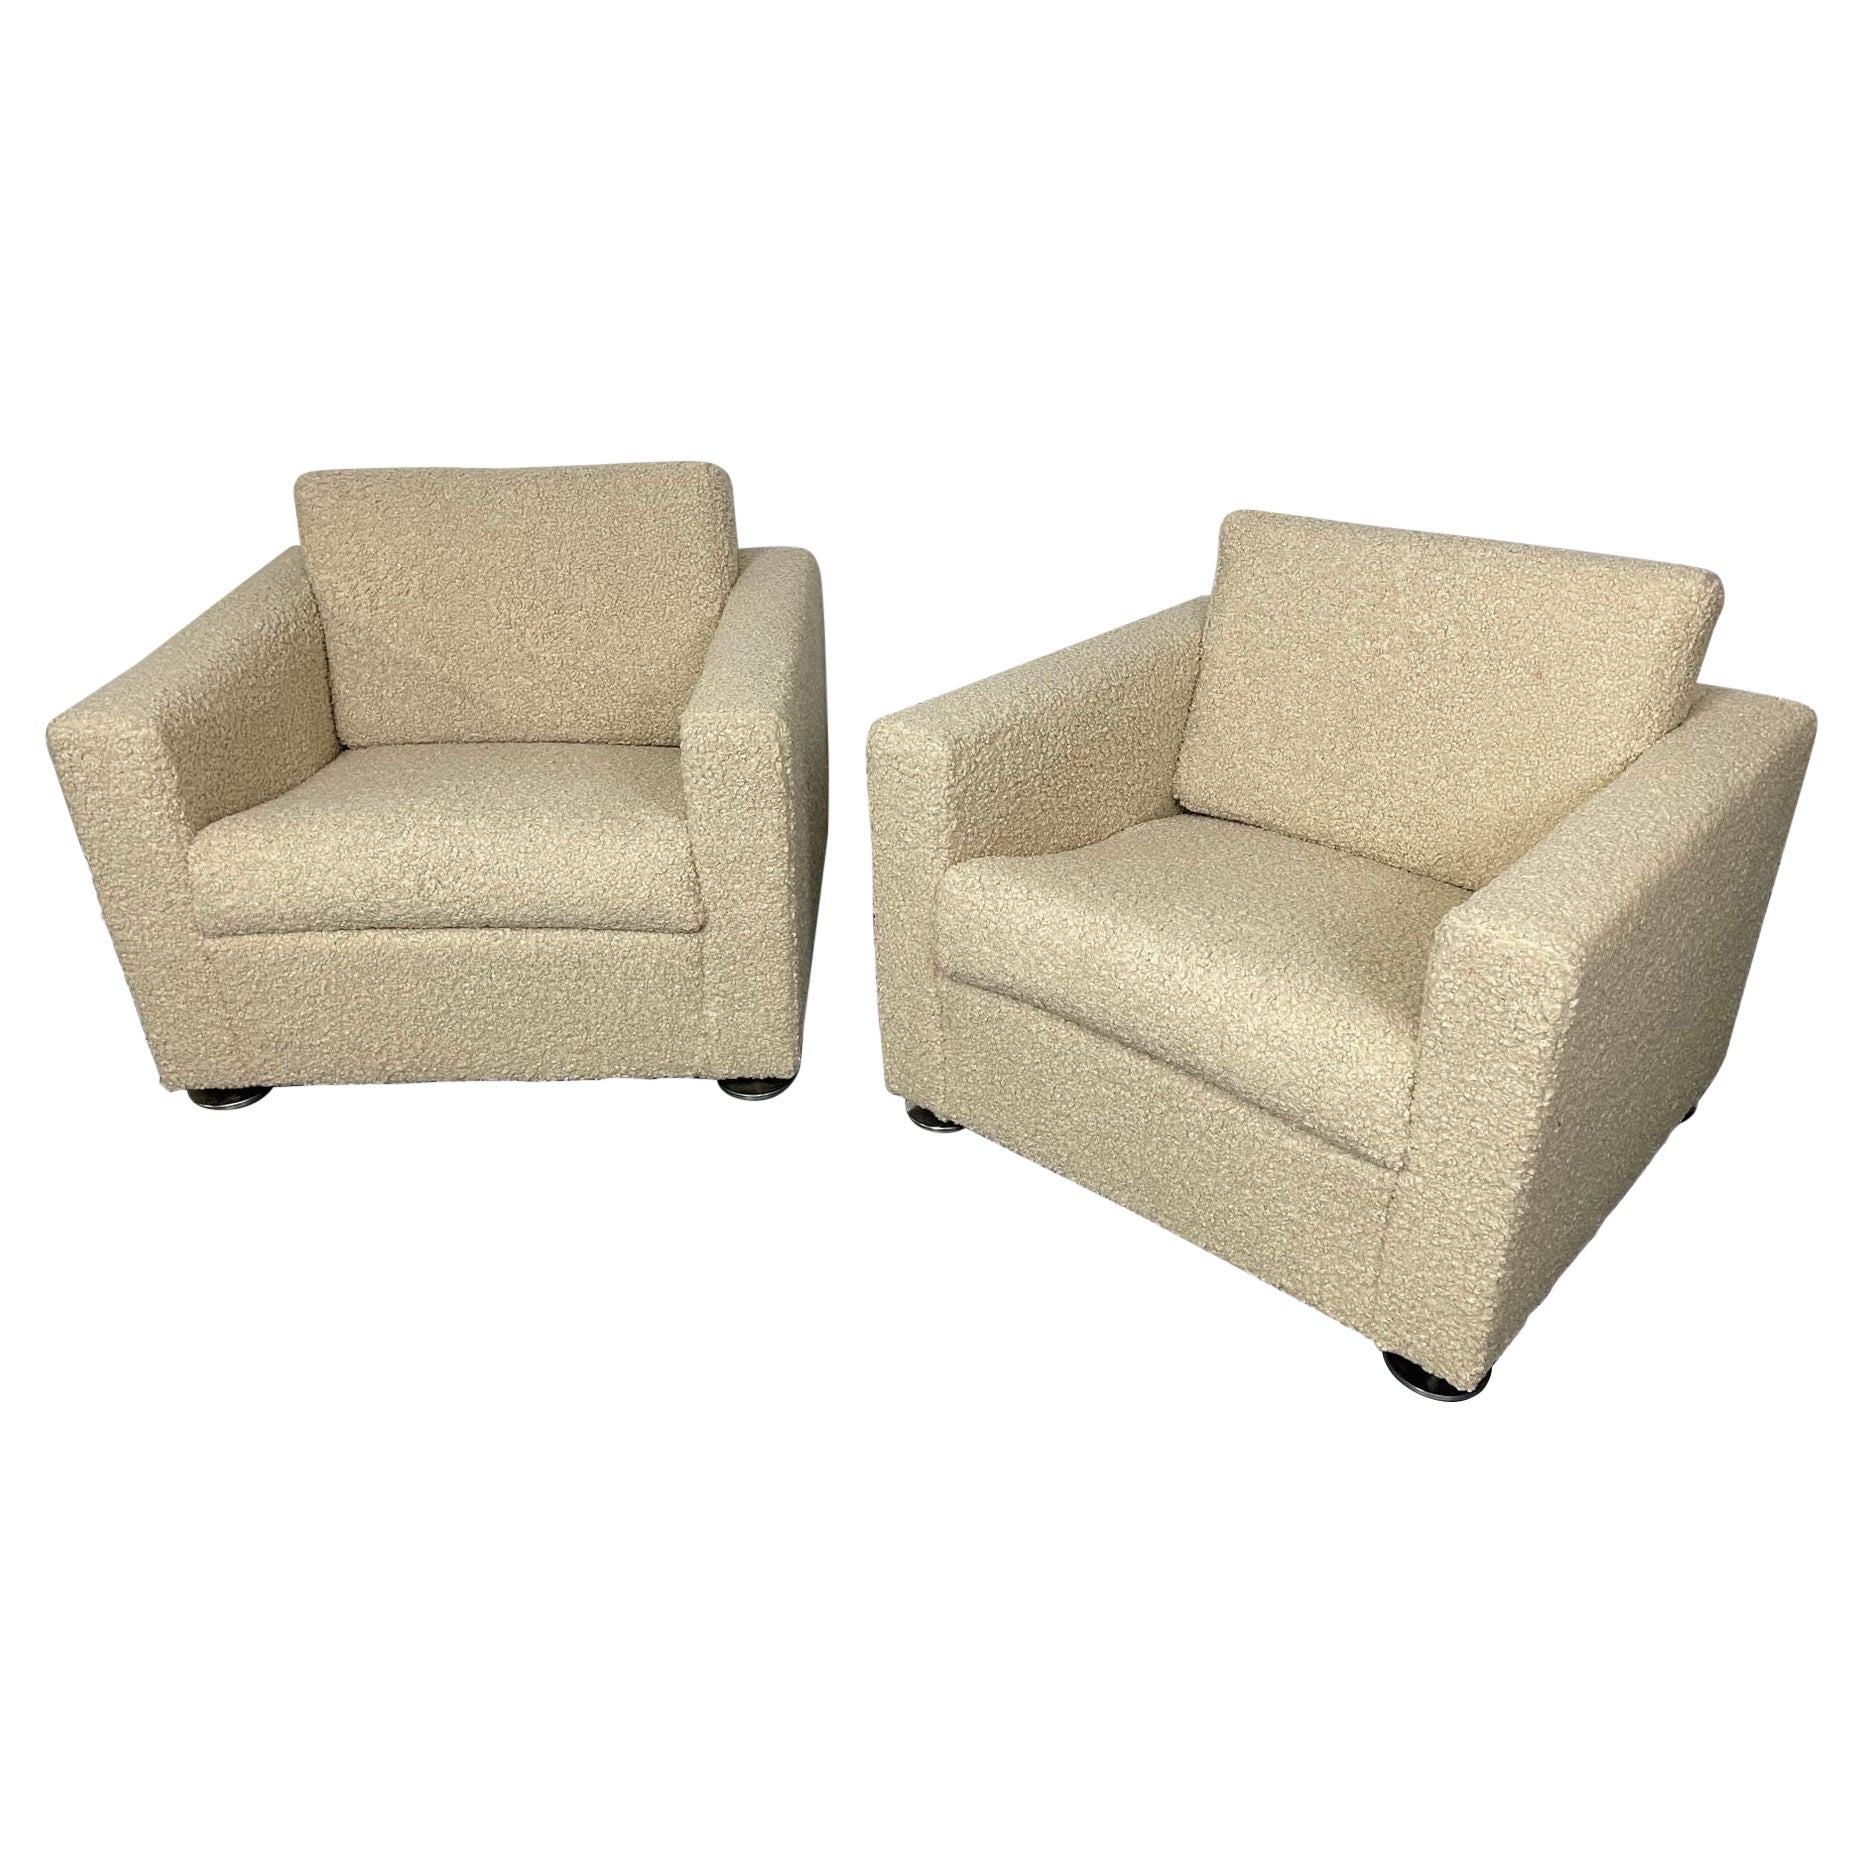 Pair Stendig Arm Chairs, Switzerland, New Luxurious Boucle, Mid-Century Modern For Sale